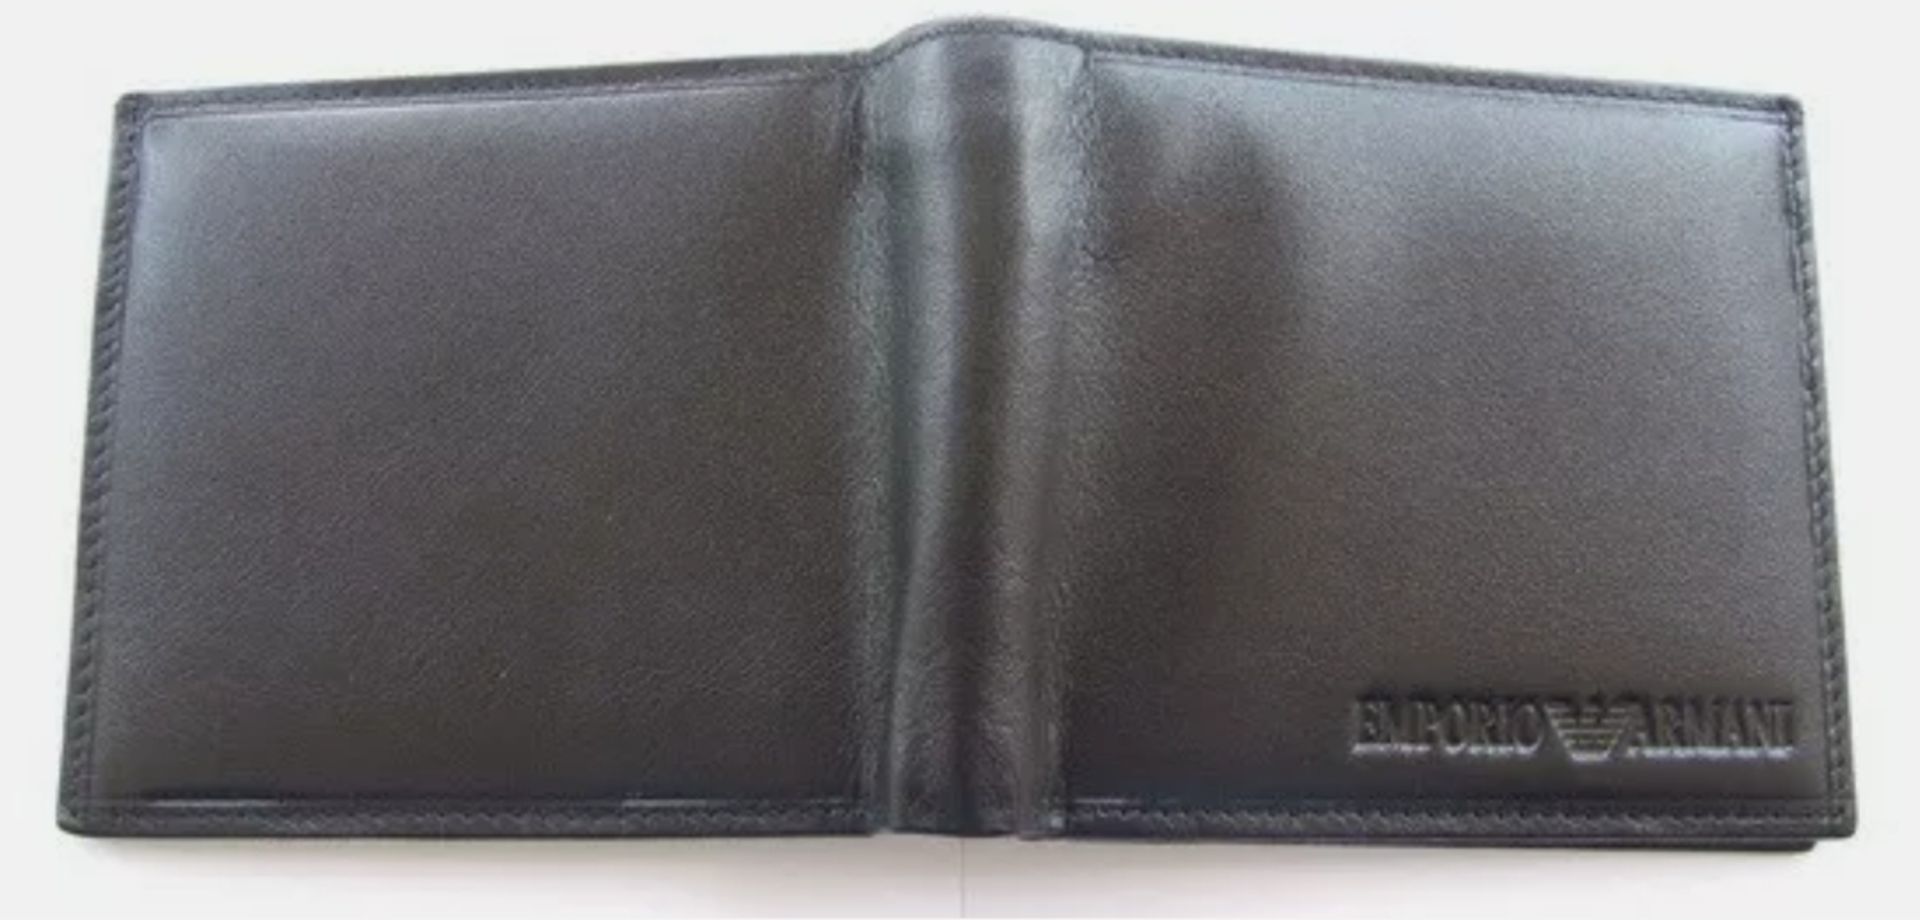 Emporio Armani Men's Leather Wallet - New With Box - Image 3 of 6